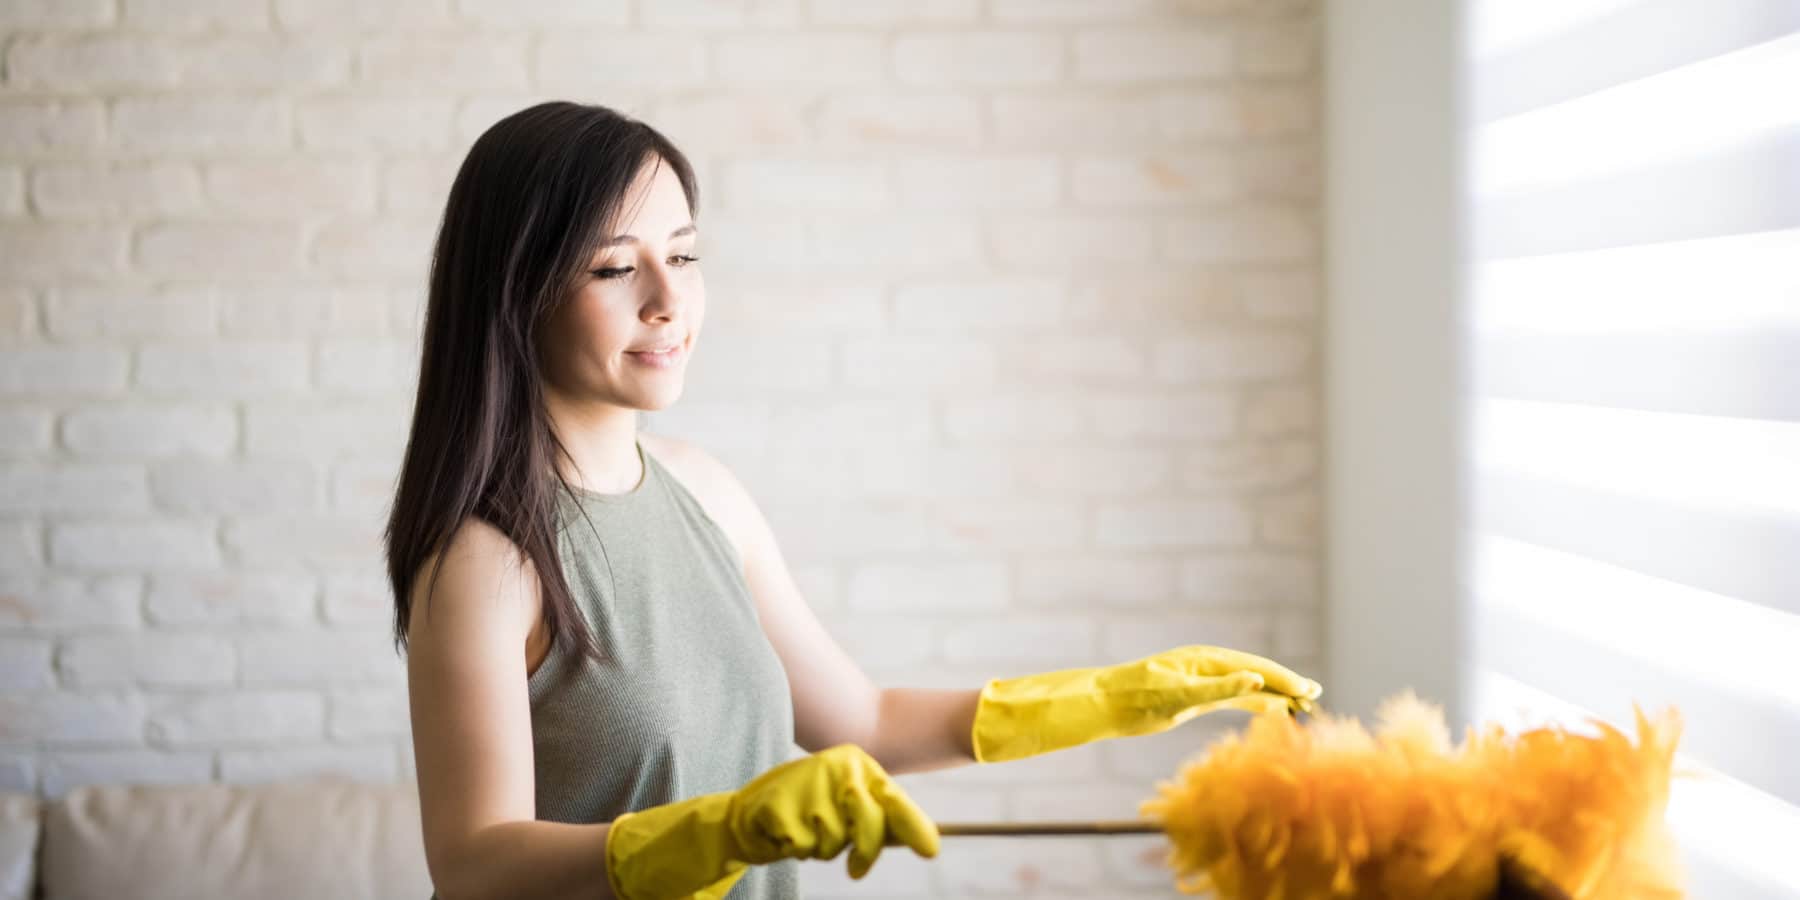 Woman using a swiffer eliminate dust mites.